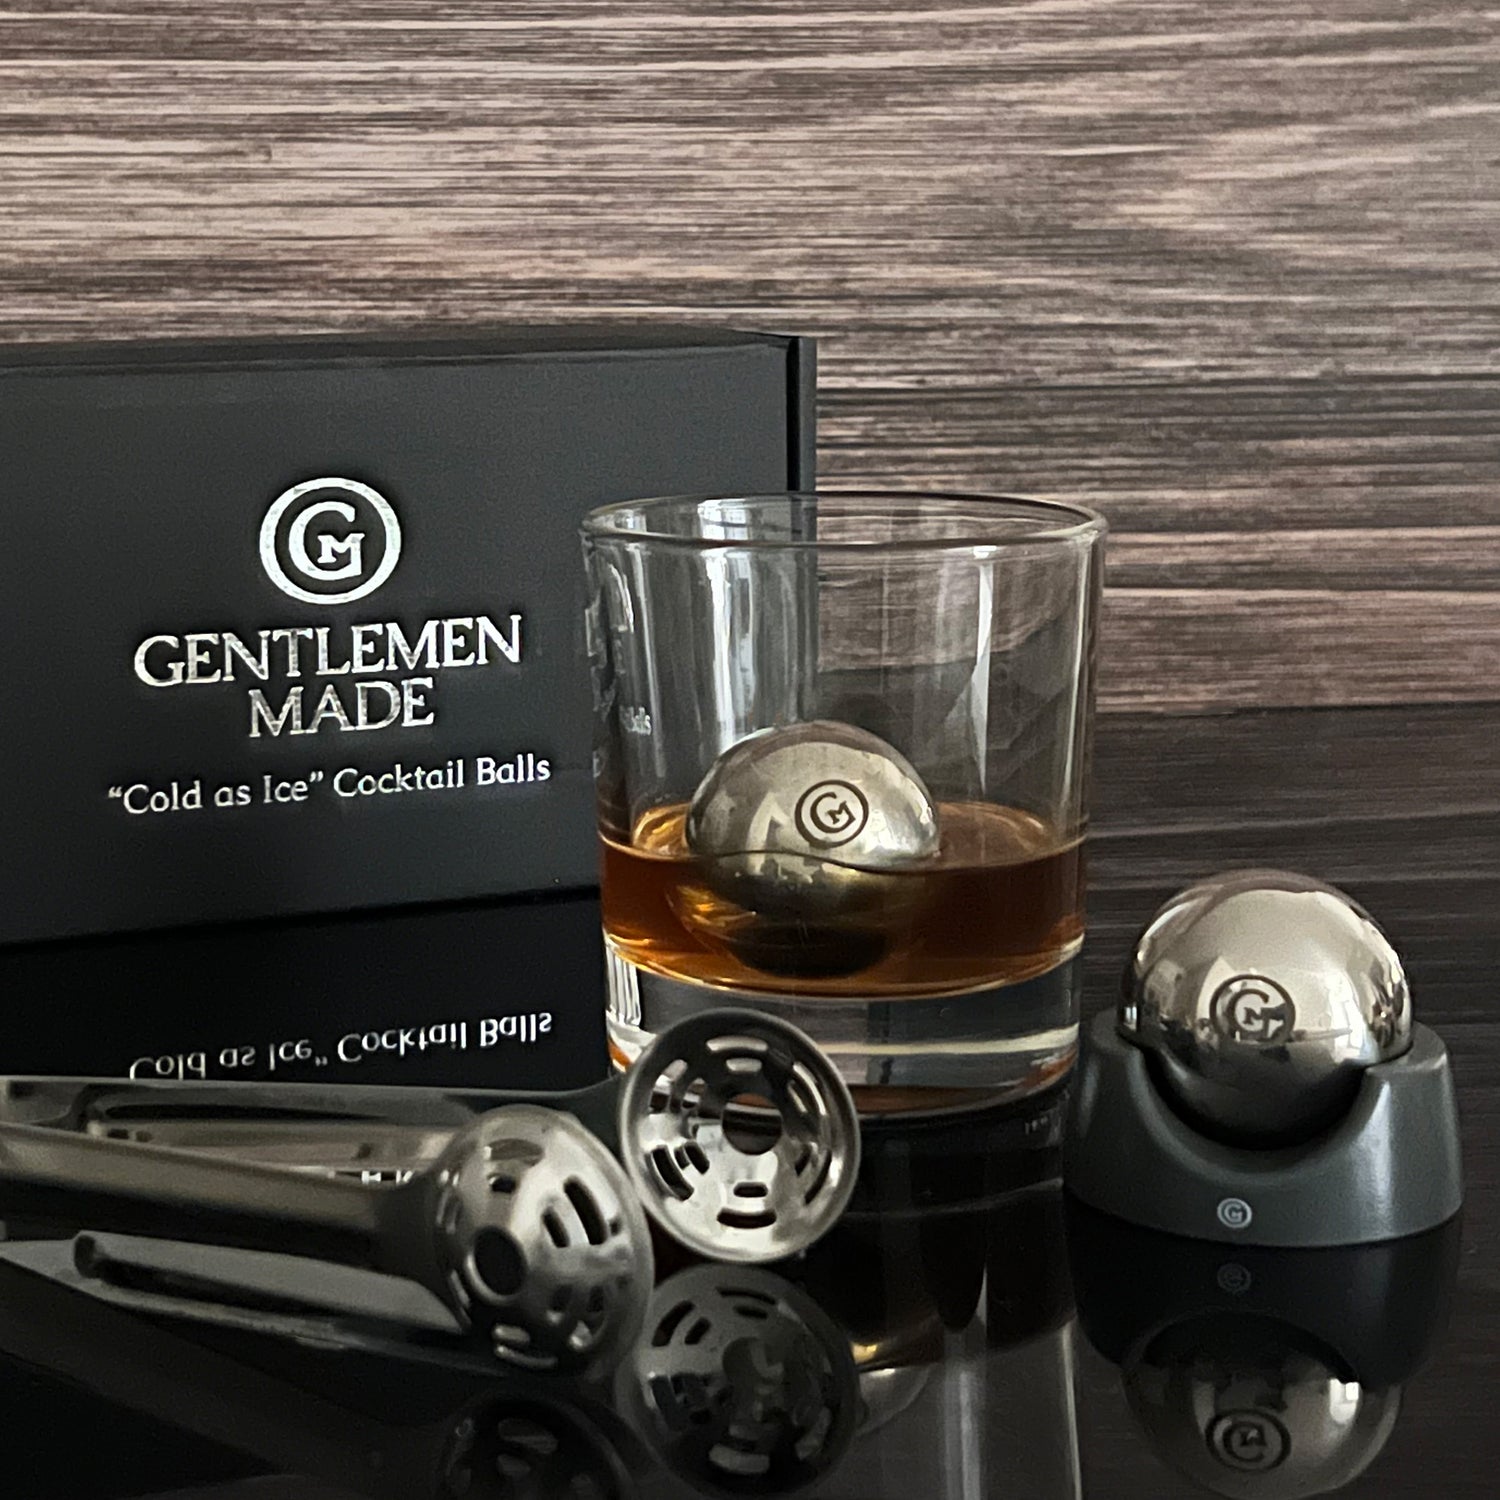 Luxury Cocktail Bourbon Smokers and Accessories - Gentlemen Made